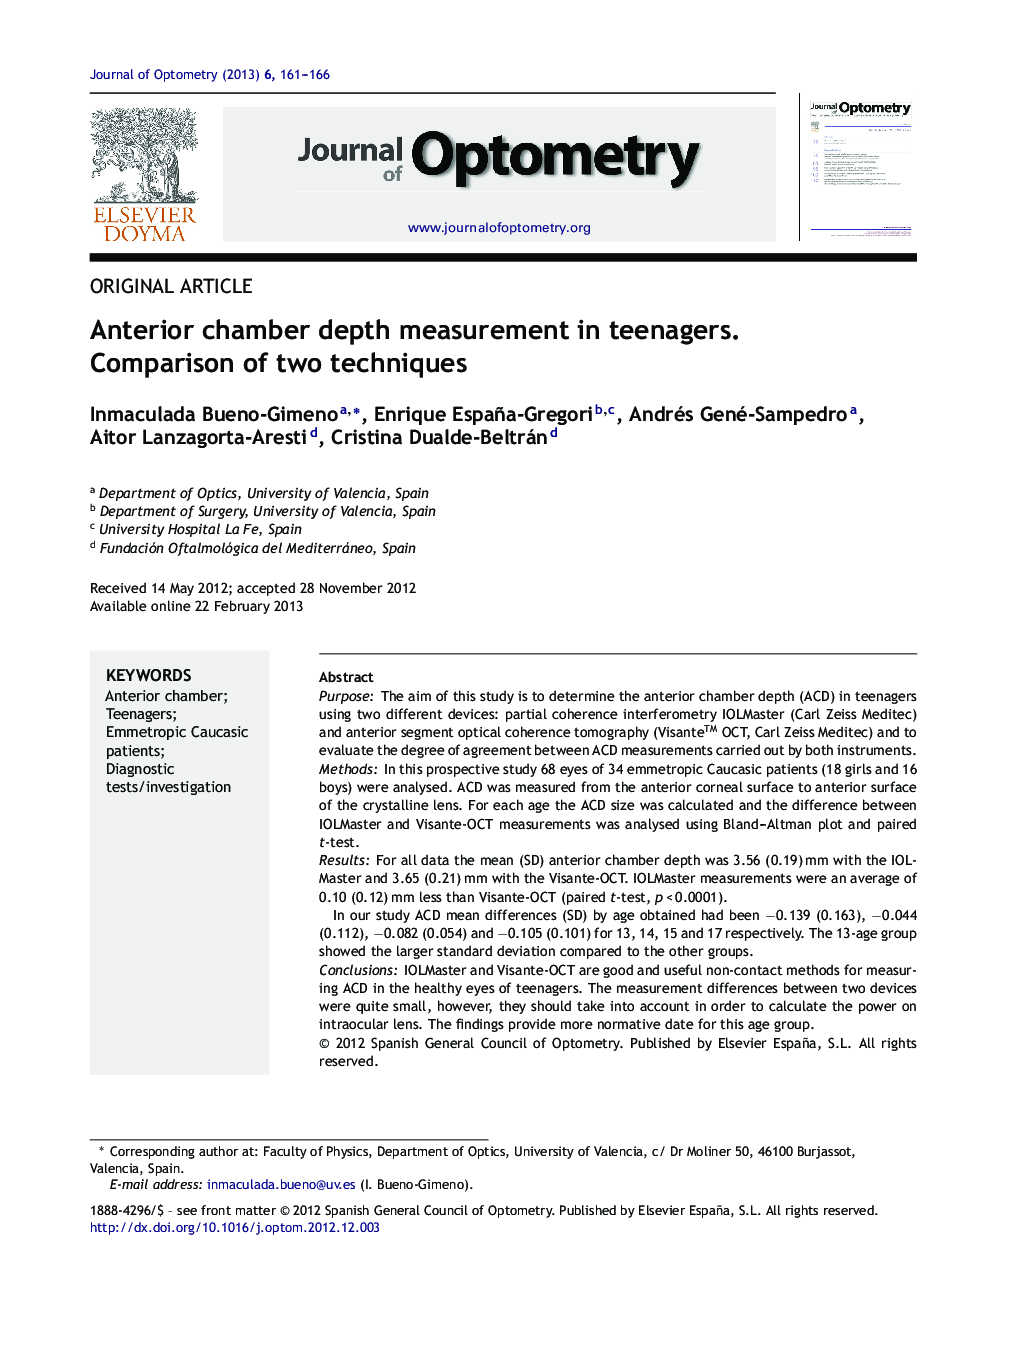 Anterior chamber depth measurement in teenagers. Comparison of two techniques